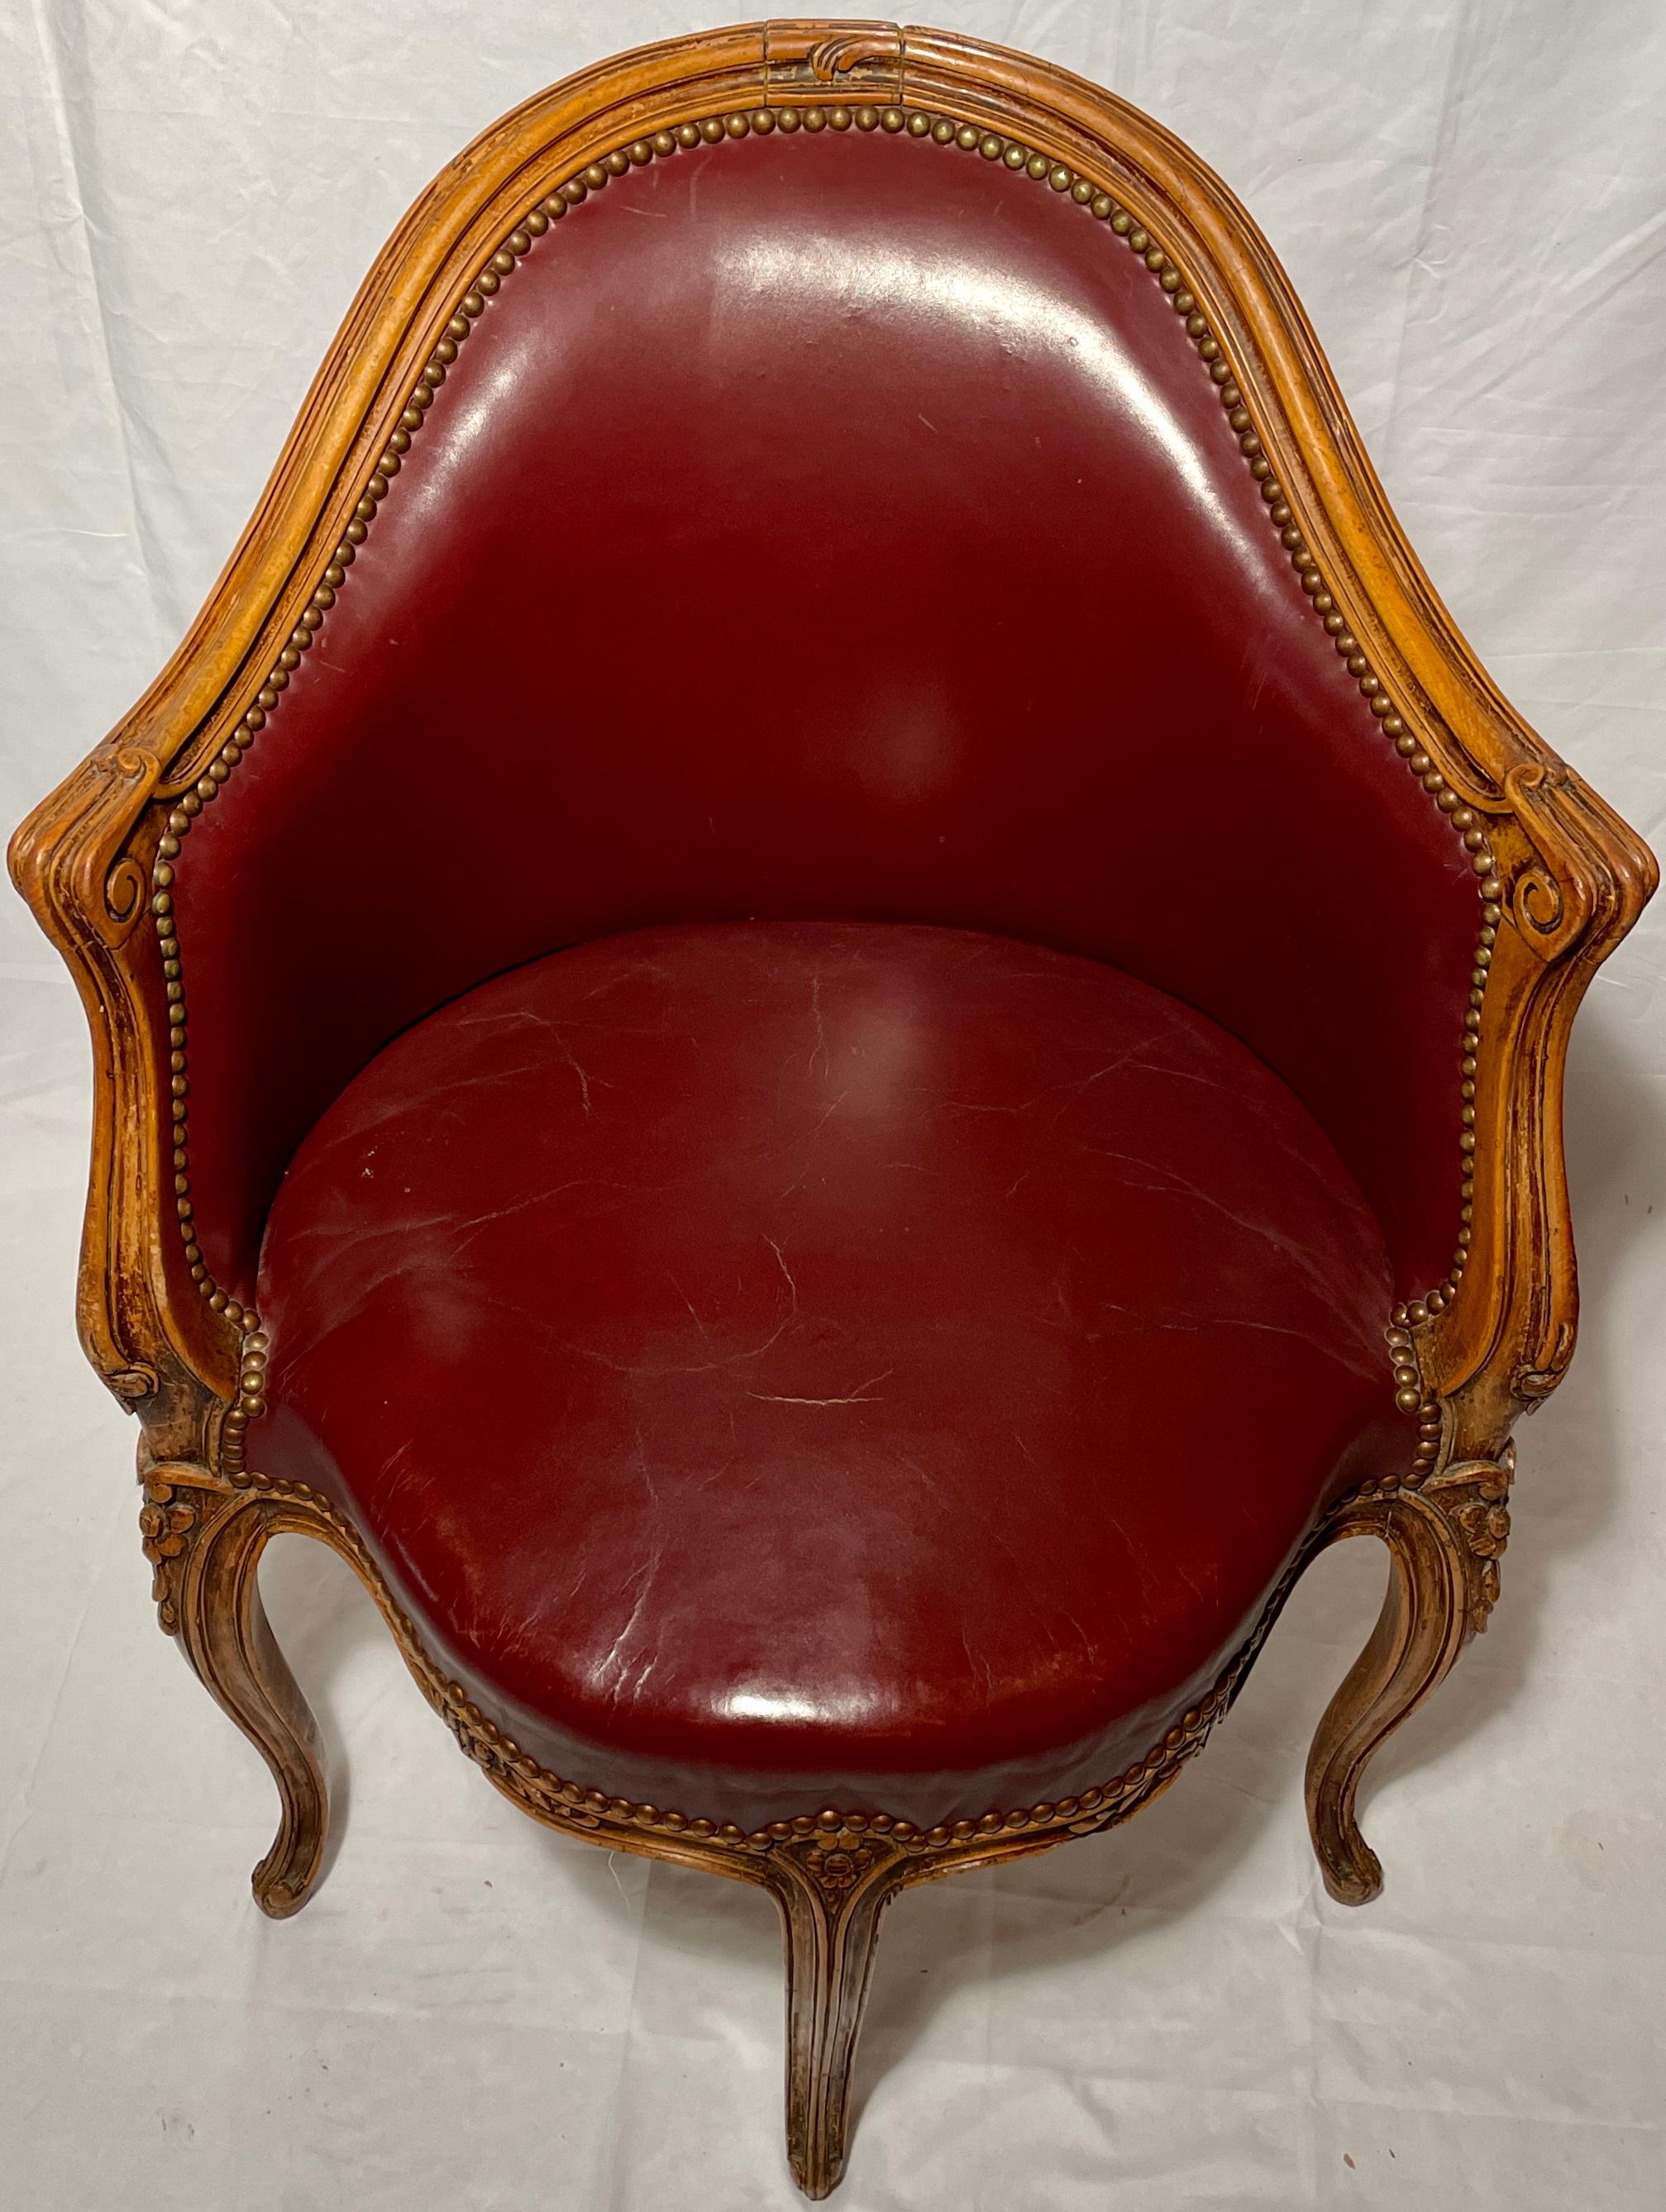 Antique French carved walnut desk chair, circa 1880.
With Burgundy Leather Upholstery. 